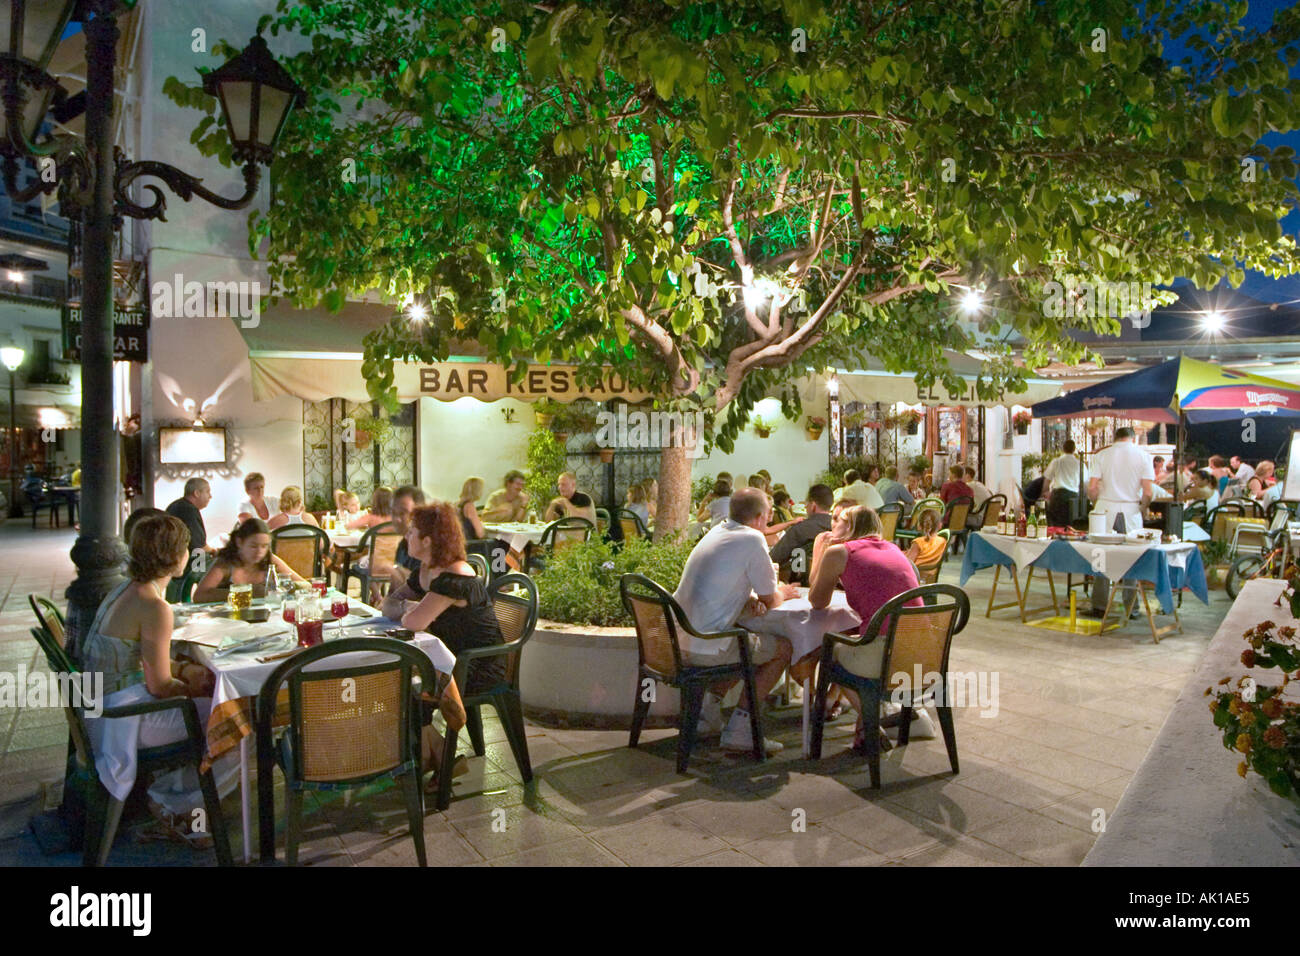 Restaurant at night in the old town, Mijas, Costa del Sol, Andalusia, Spain Stock Photo